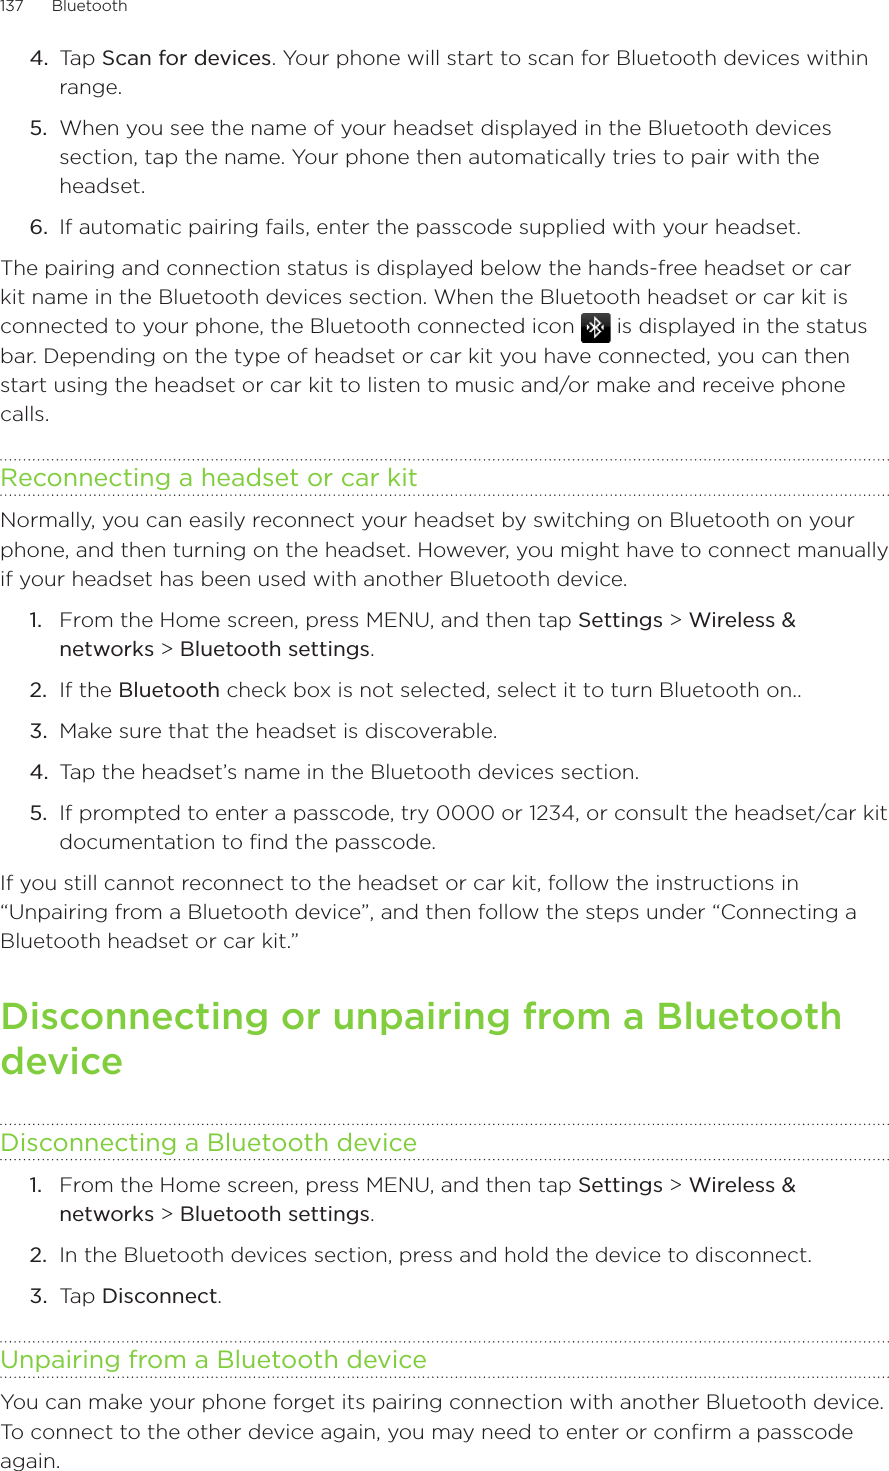 137      Bluetooth      4.  Tap Scan for devices. Your phone will start to scan for Bluetooth devices within range.5.  When you see the name of your headset displayed in the Bluetooth devices section, tap the name. Your phone then automatically tries to pair with the headset.6.  If automatic pairing fails, enter the passcode supplied with your headset.The pairing and connection status is displayed below the hands-free headset or car kit name in the Bluetooth devices section. When the Bluetooth headset or car kit is connected to your phone, the Bluetooth connected icon   is displayed in the status bar. Depending on the type of headset or car kit you have connected, you can then start using the headset or car kit to listen to music and/or make and receive phone calls.Reconnecting a headset or car kitNormally, you can easily reconnect your headset by switching on Bluetooth on your phone, and then turning on the headset. However, you might have to connect manually if your headset has been used with another Bluetooth device.From the Home screen, press MENU, and then tap Settings &gt; Wireless &amp; networks &gt; Bluetooth settings.If the Bluetooth check box is not selected, select it to turn Bluetooth on..Make sure that the headset is discoverable.Tap the headset’s name in the Bluetooth devices section.If prompted to enter a passcode, try 0000 or 1234, or consult the headset/car kit documentation to find the passcode.If you still cannot reconnect to the headset or car kit, follow the instructions in “Unpairing from a Bluetooth device”, and then follow the steps under “Connecting a Bluetooth headset or car kit.”Disconnecting or unpairing from a Bluetooth deviceDisconnecting a Bluetooth deviceFrom the Home screen, press MENU, and then tap Settings &gt; Wireless &amp; networks &gt; Bluetooth settings.In the Bluetooth devices section, press and hold the device to disconnect.Tap Disconnect.Unpairing from a Bluetooth deviceYou can make your phone forget its pairing connection with another Bluetooth device.  To connect to the other device again, you may need to enter or confirm a passcode again.1.2.3.4.5.1.2.3.